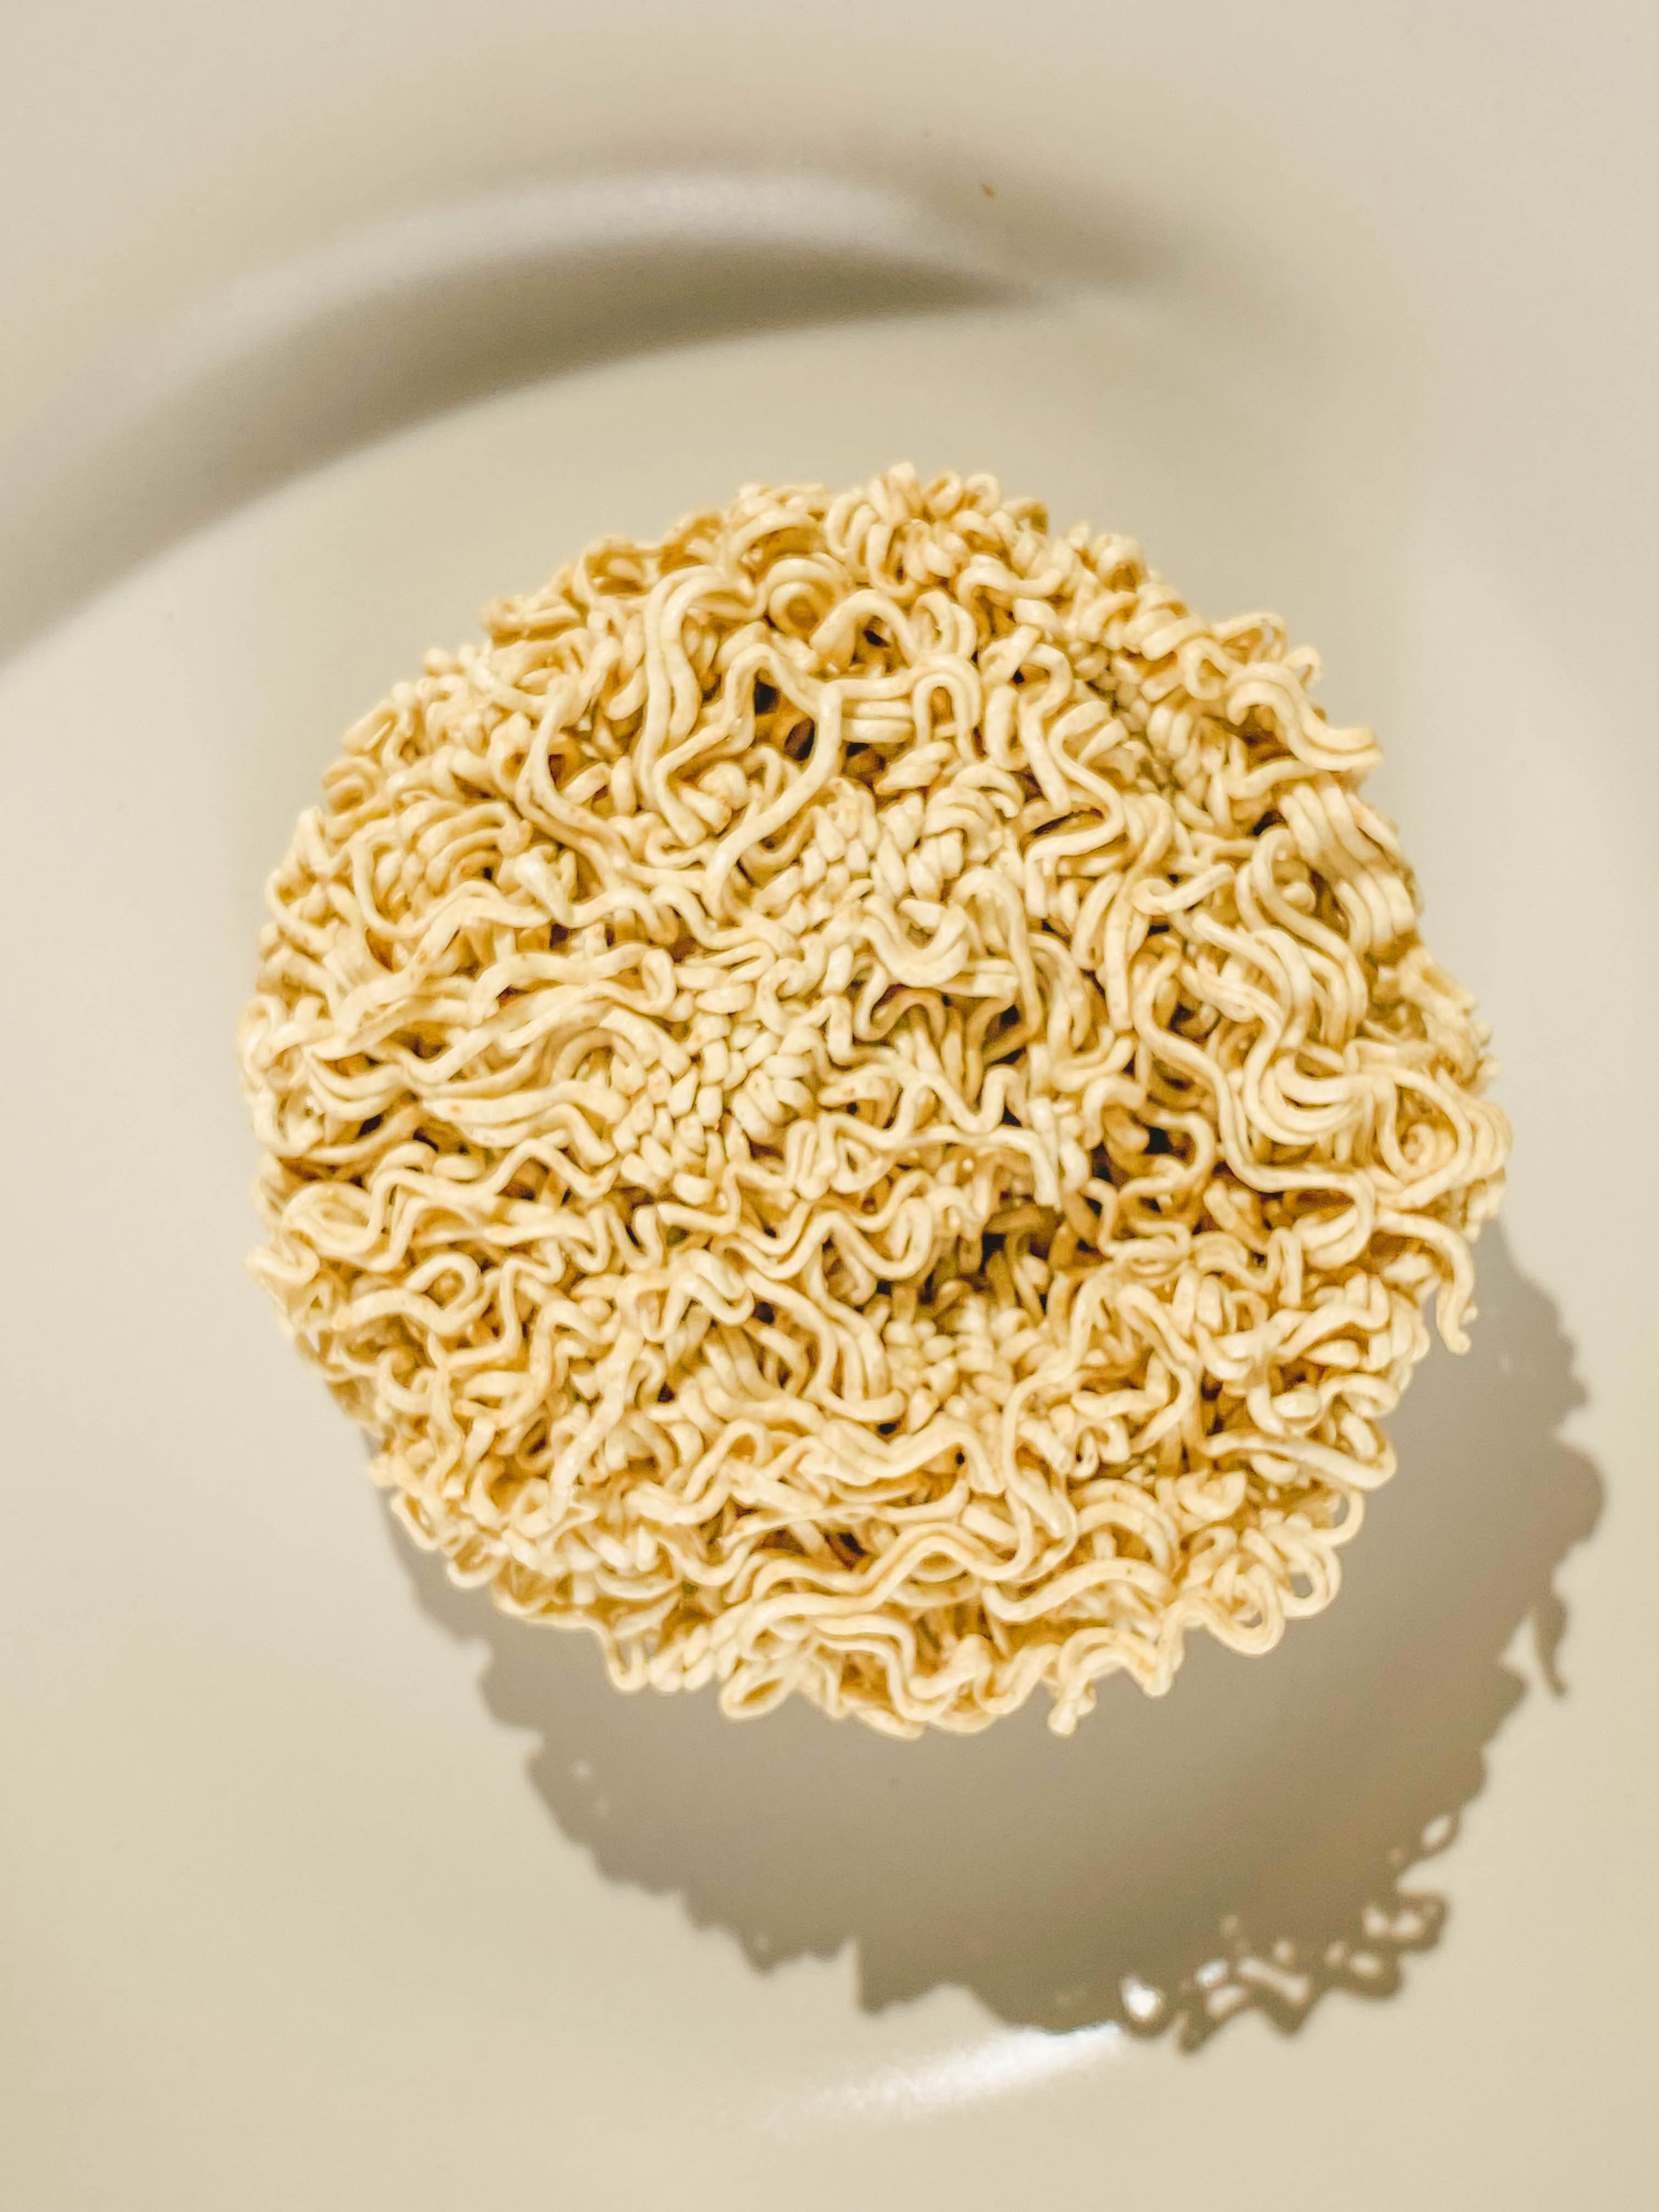 Whole Wheat Noodles: Everything You Need to Know About